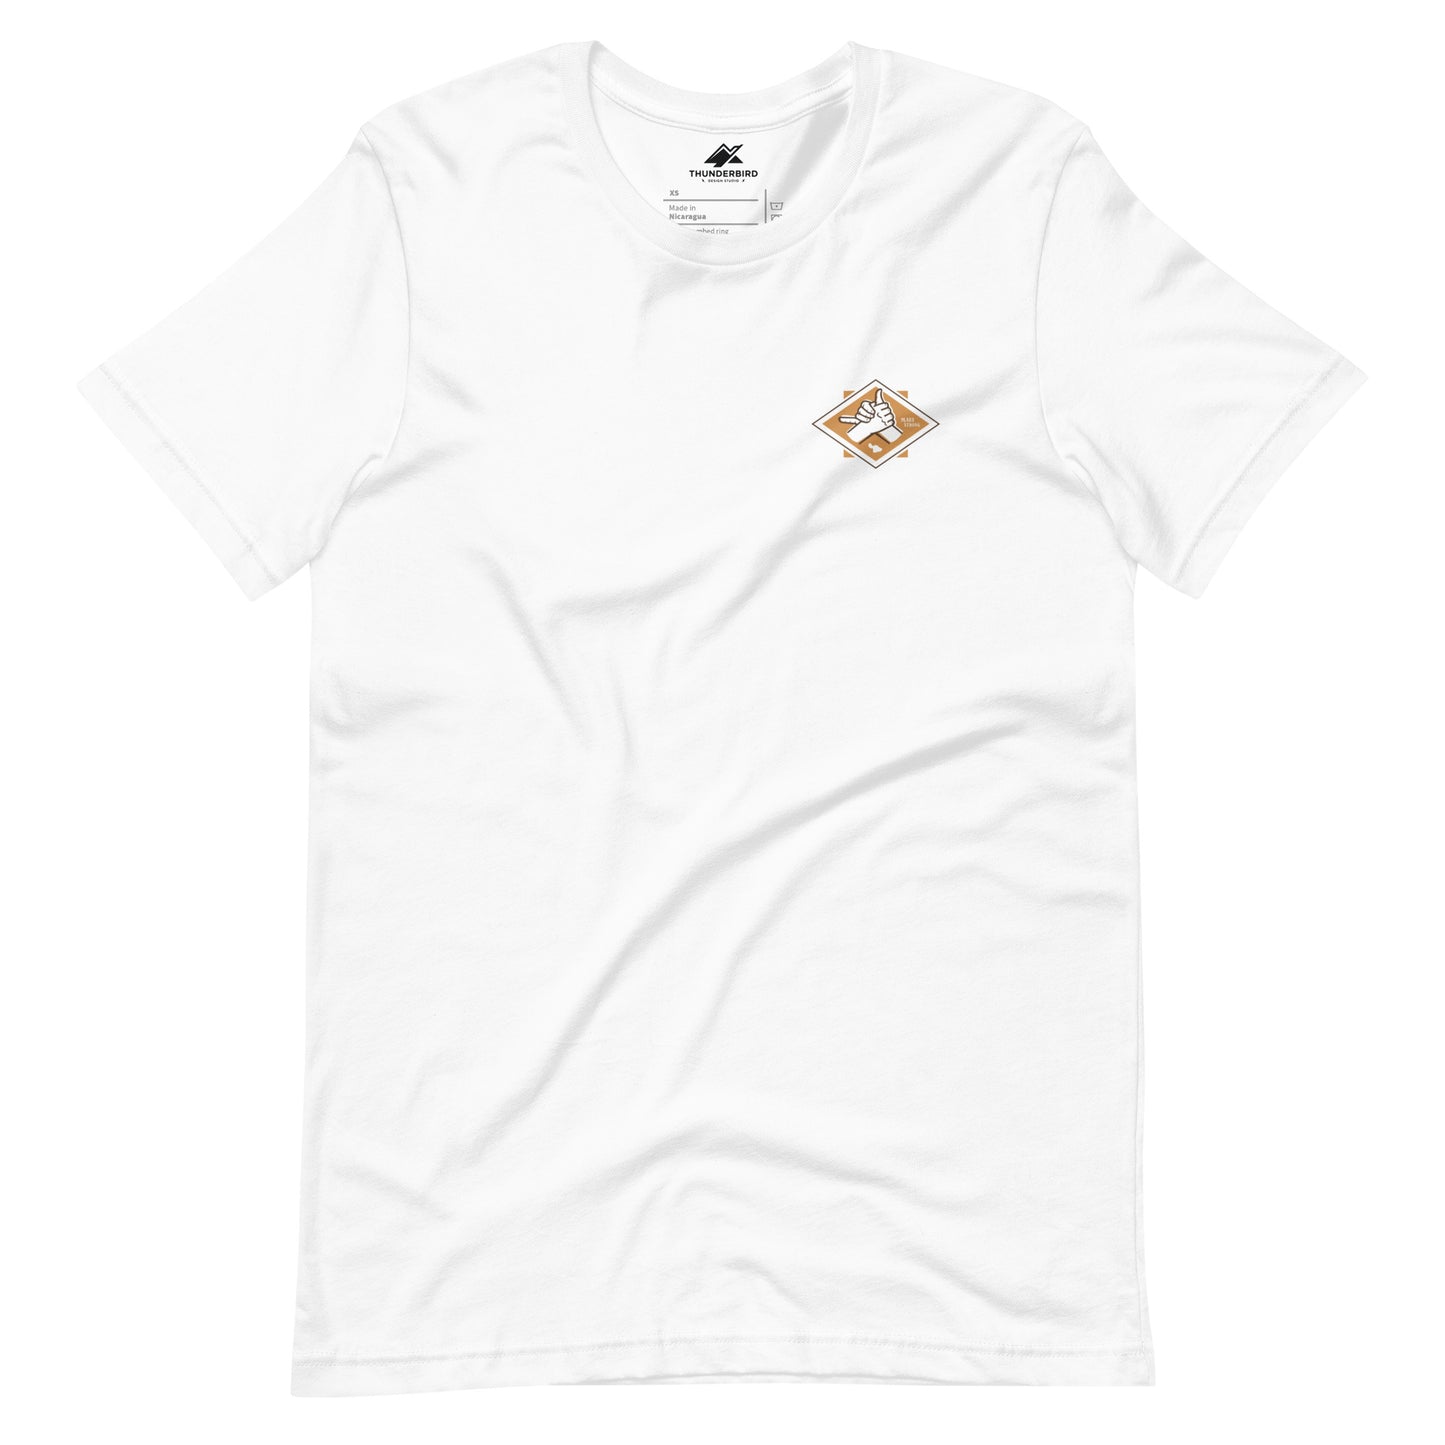 The Maui Relief t-shirt